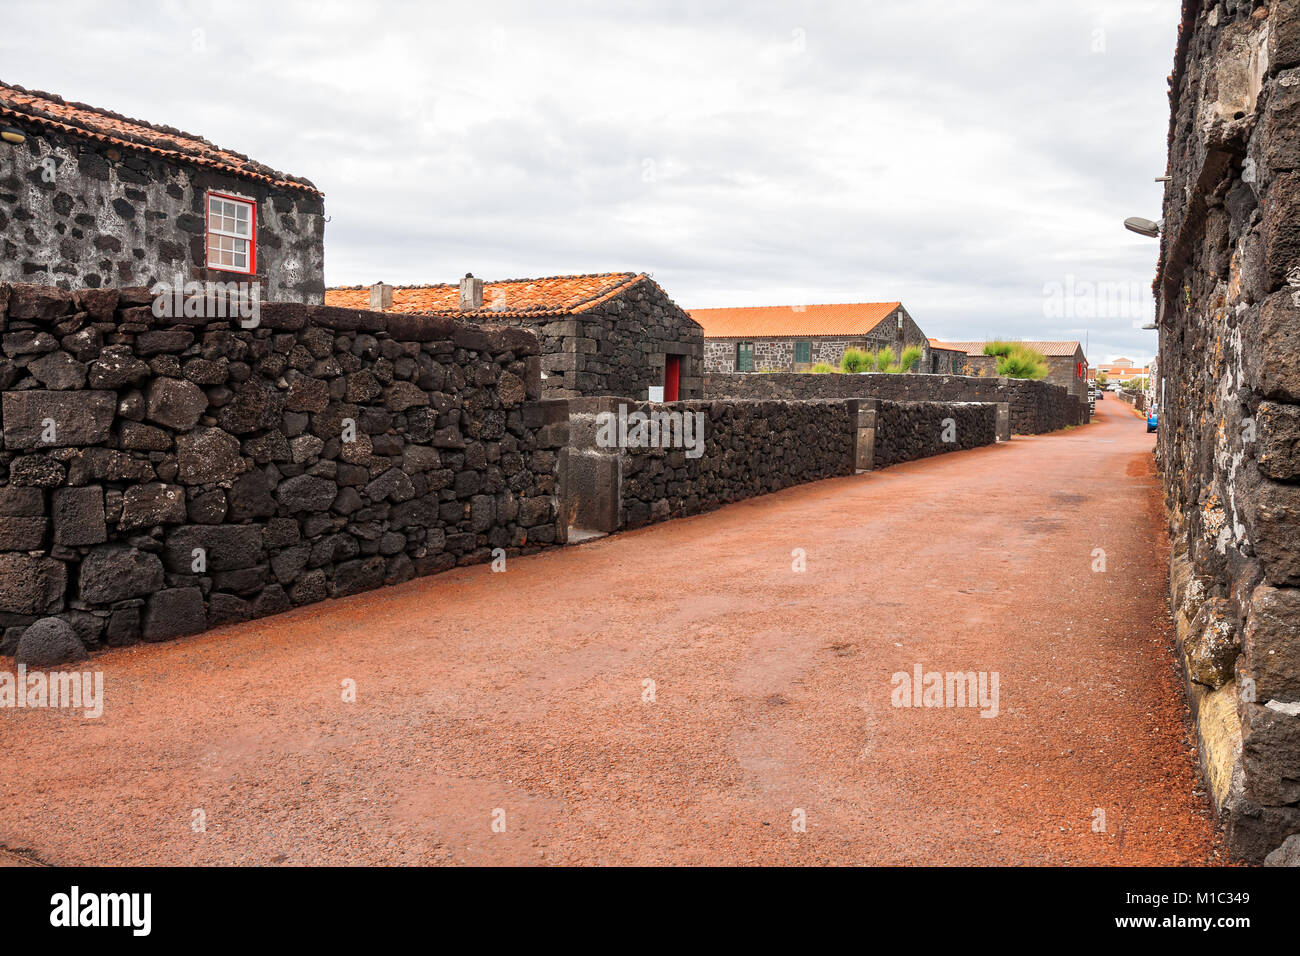 Traditional village on the island of Pico with houses made of volcanic stone, Azores Stock Photo